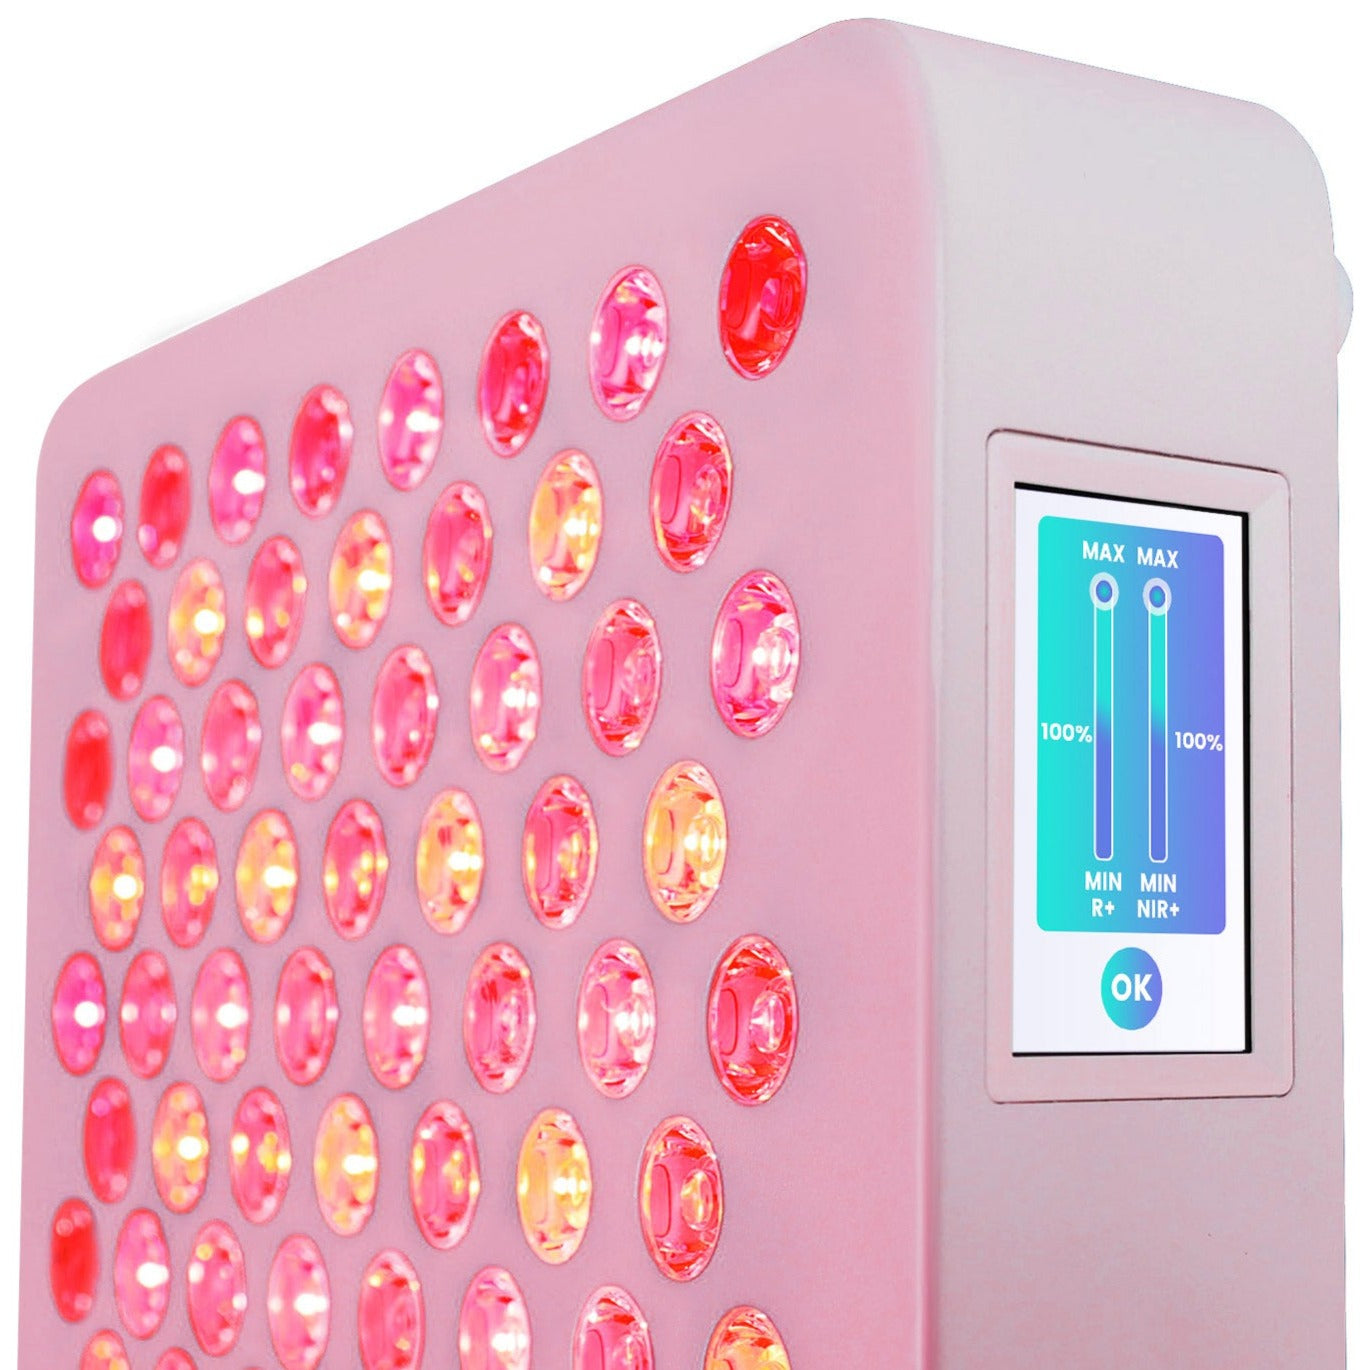 Red Light Therapy PowerPanel - MAX